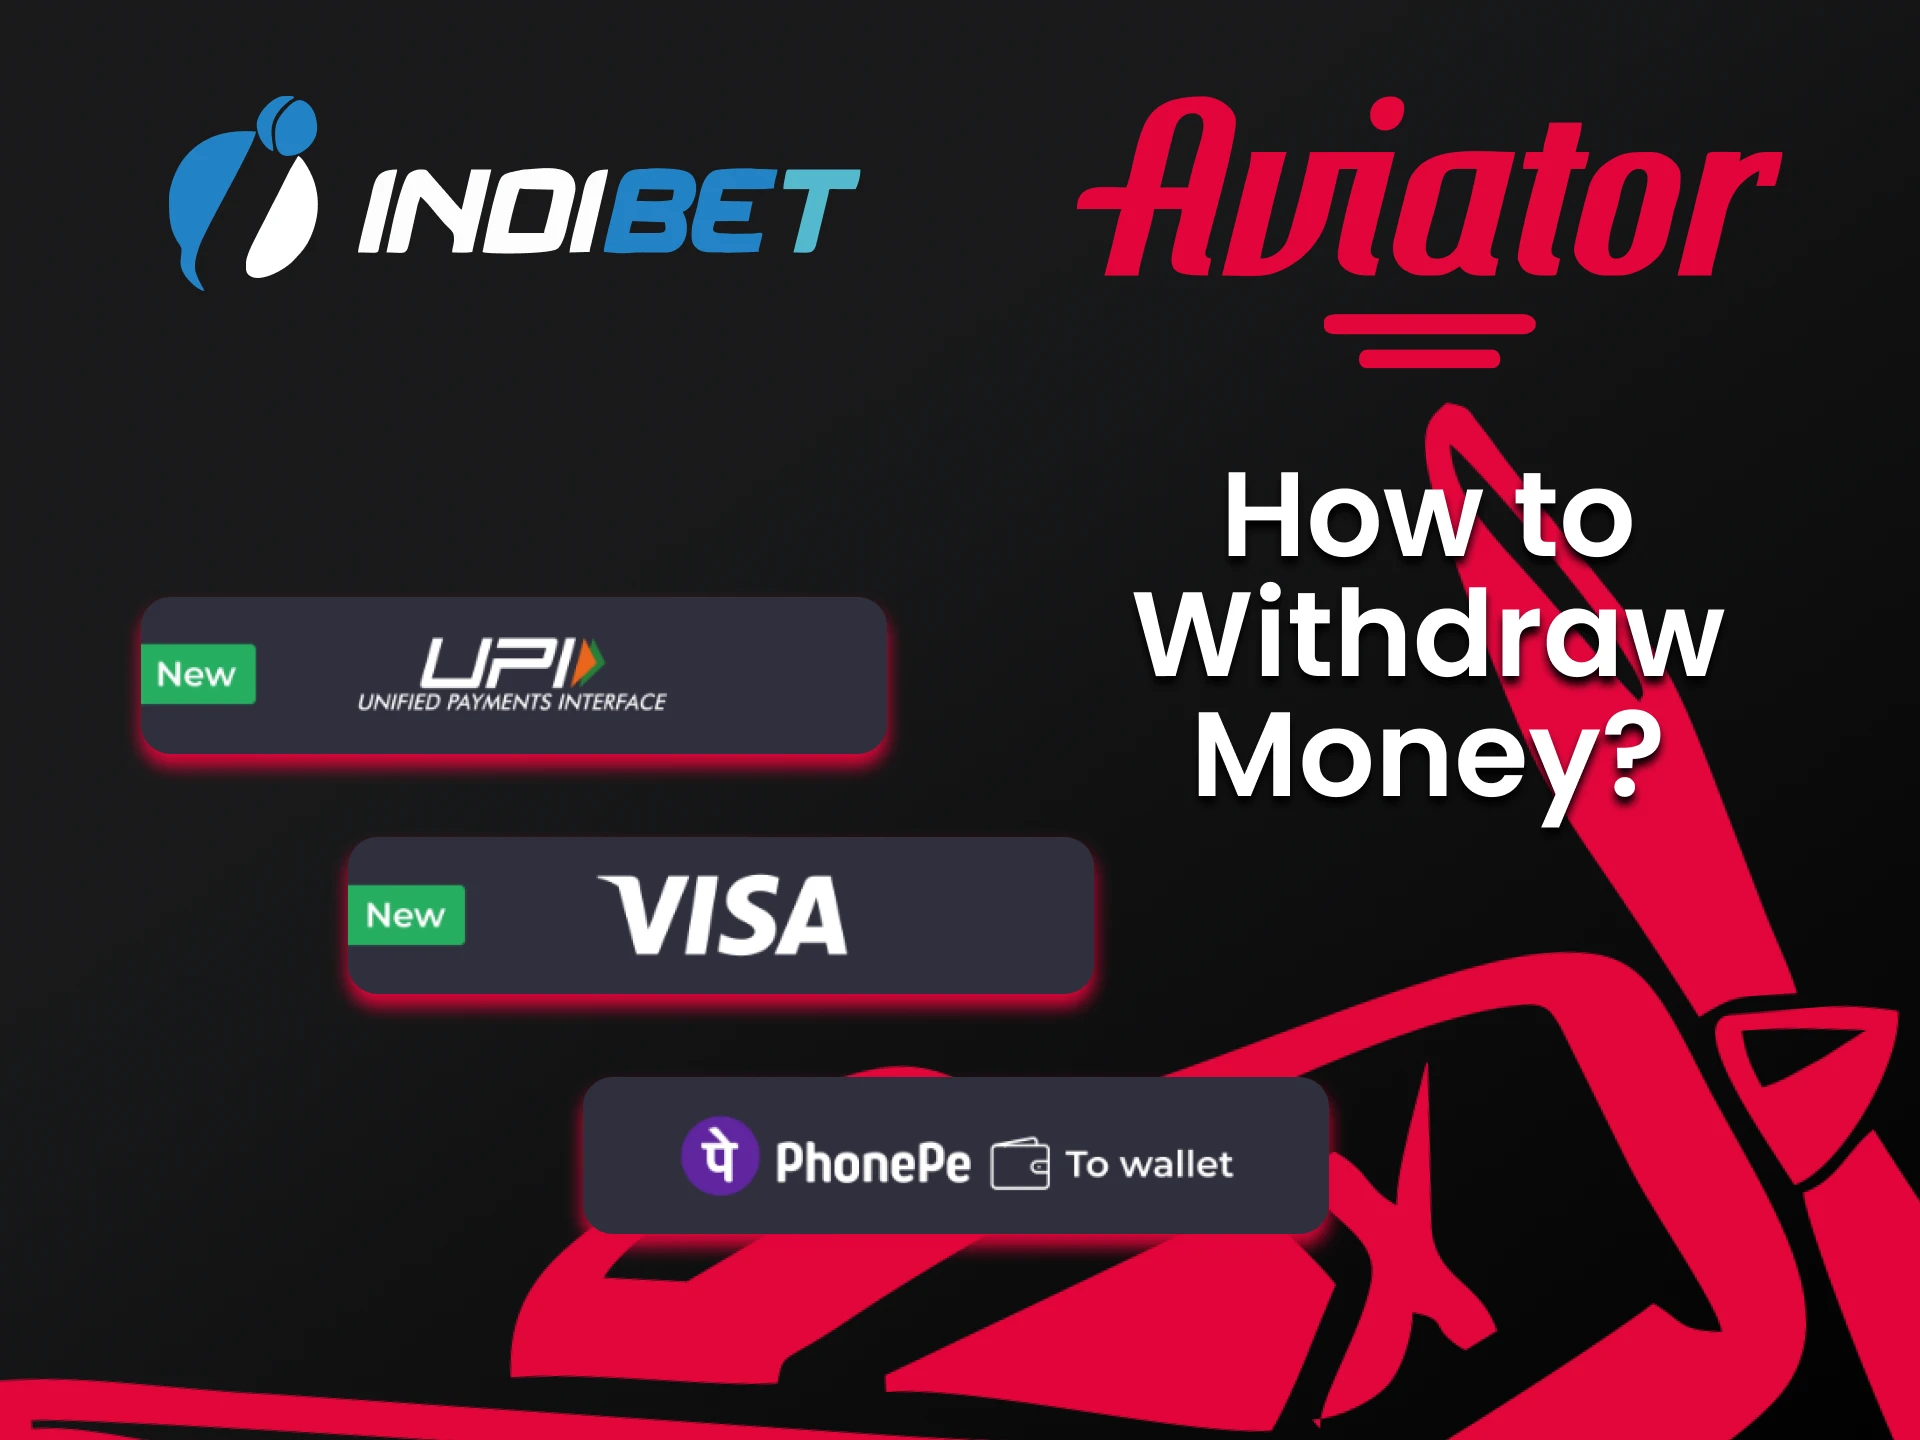 Indibet has a variety of withdrawal methods for Aviator.